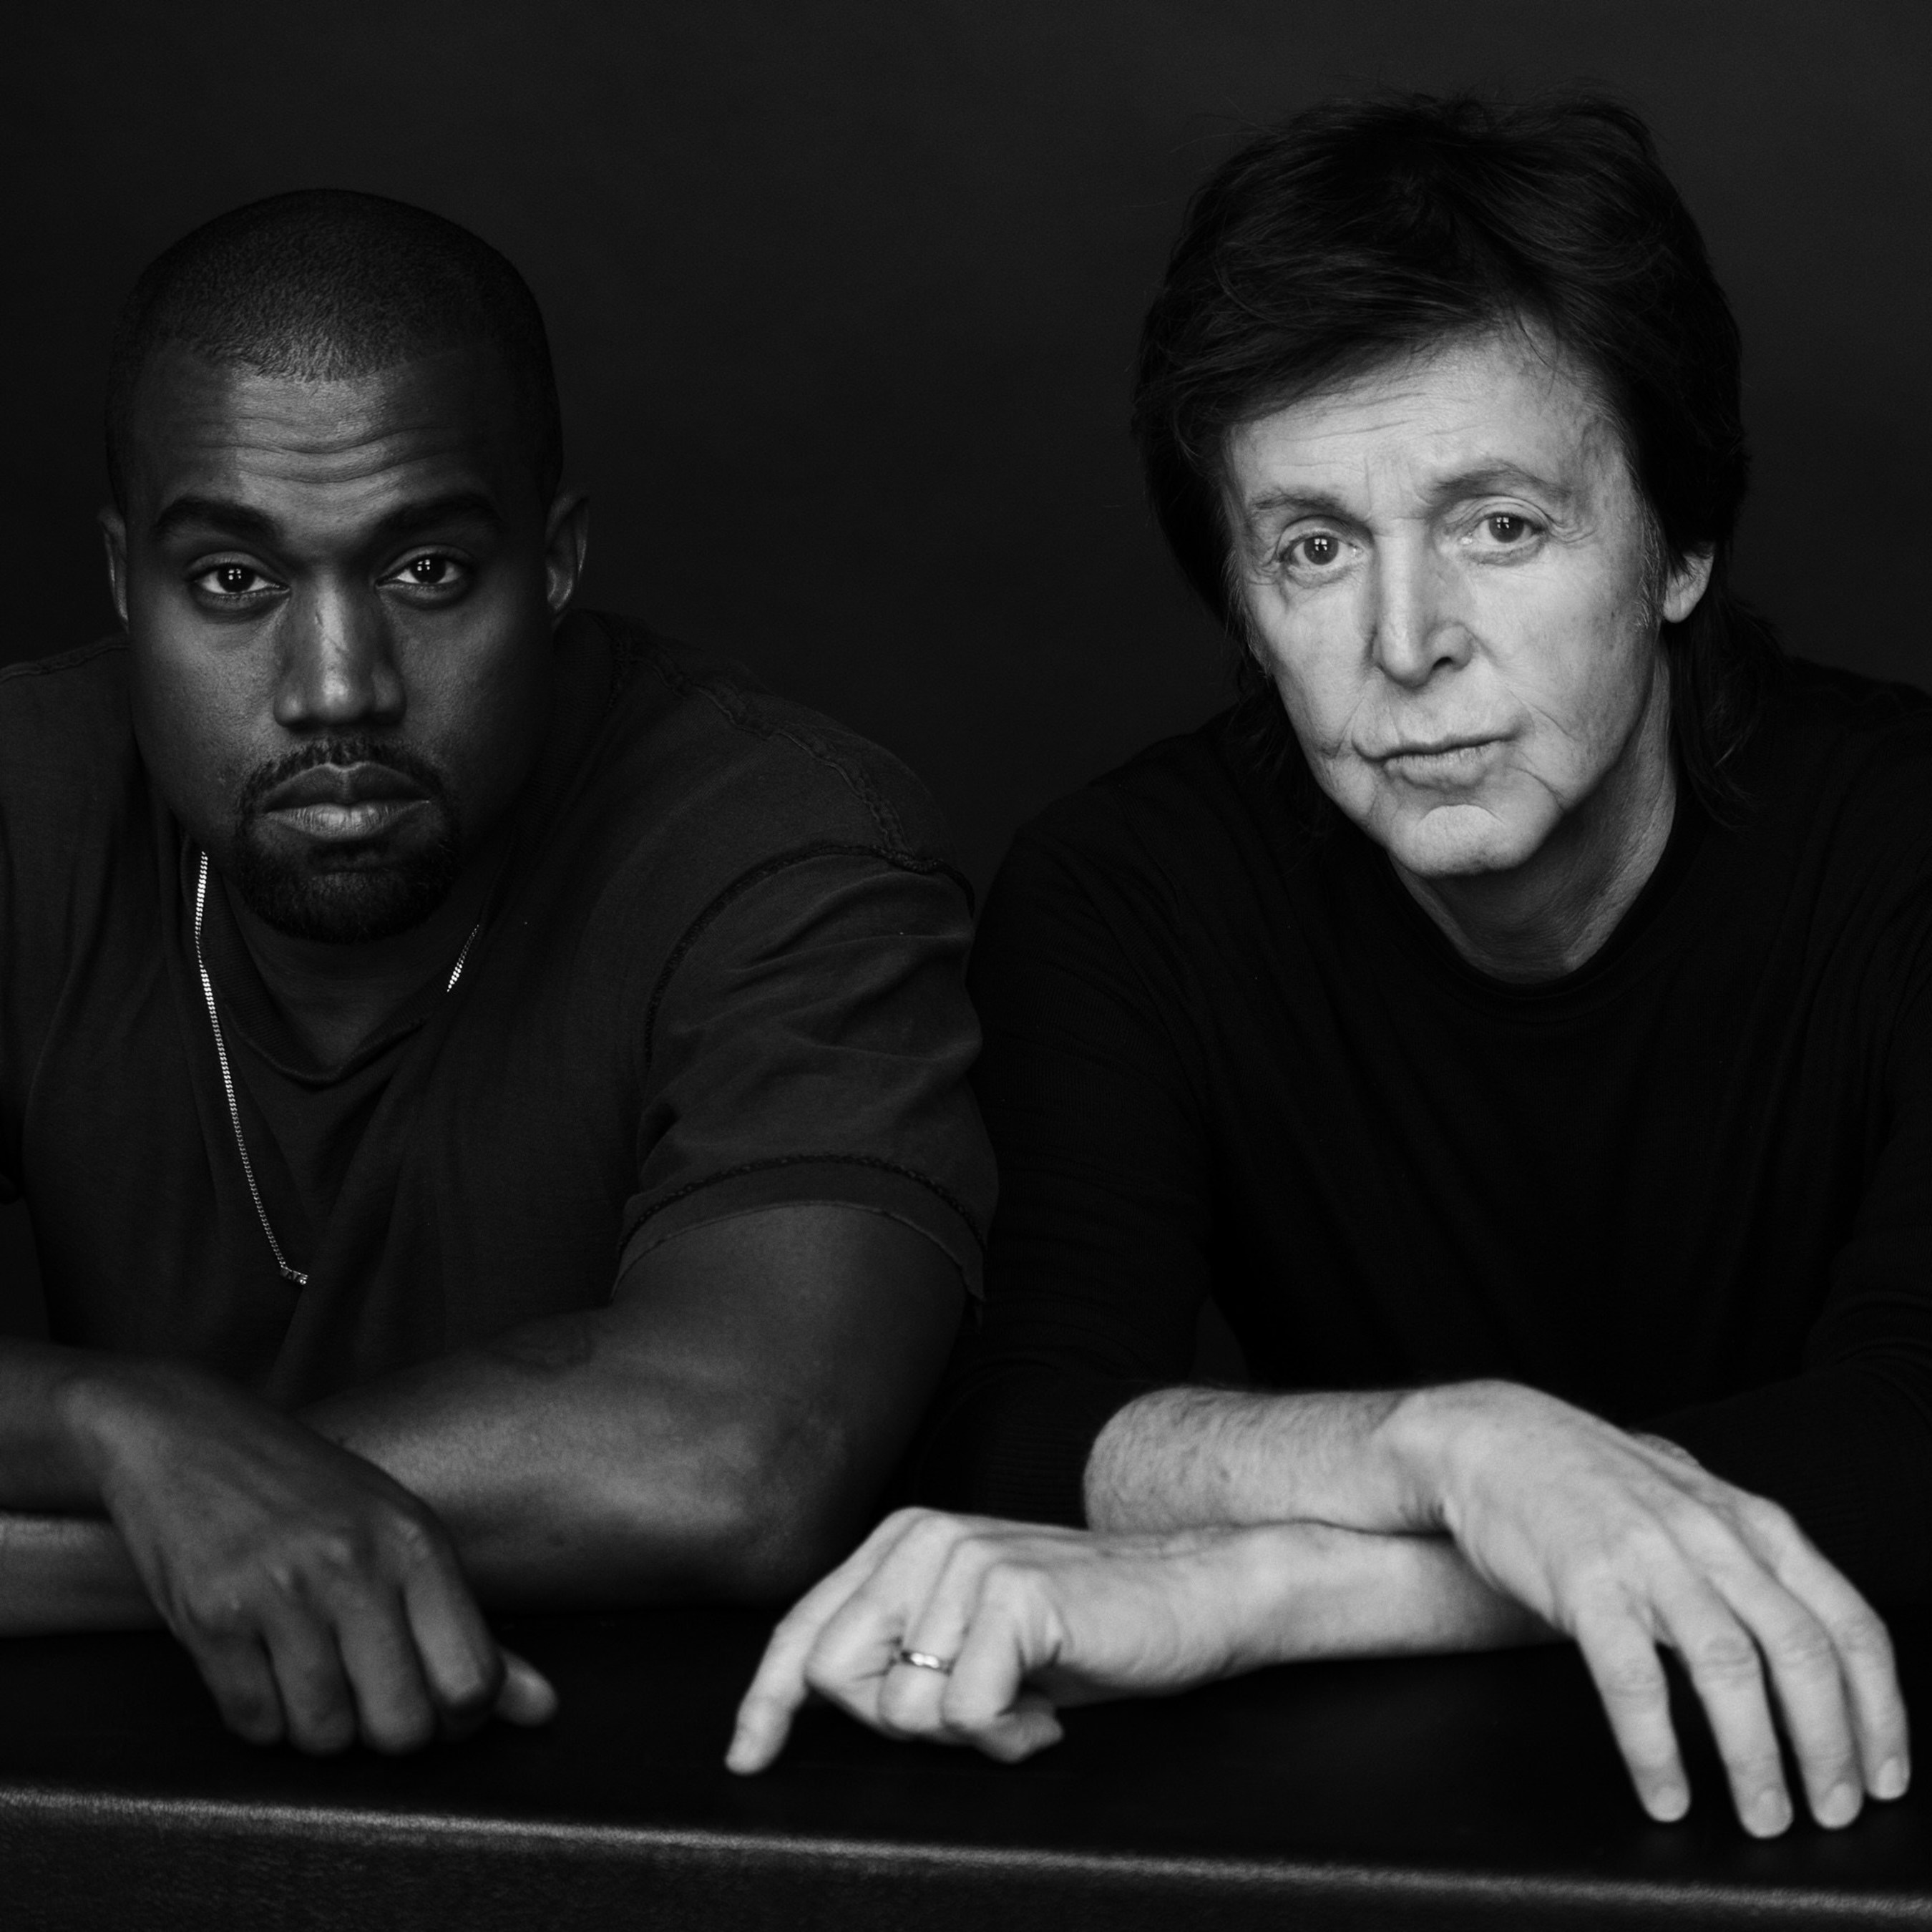 Kanye West Releases "Only One," First Single From Forthcoming Solo Album & First Reveal Of Several Musical Collaborations With Paul McCartney To Come